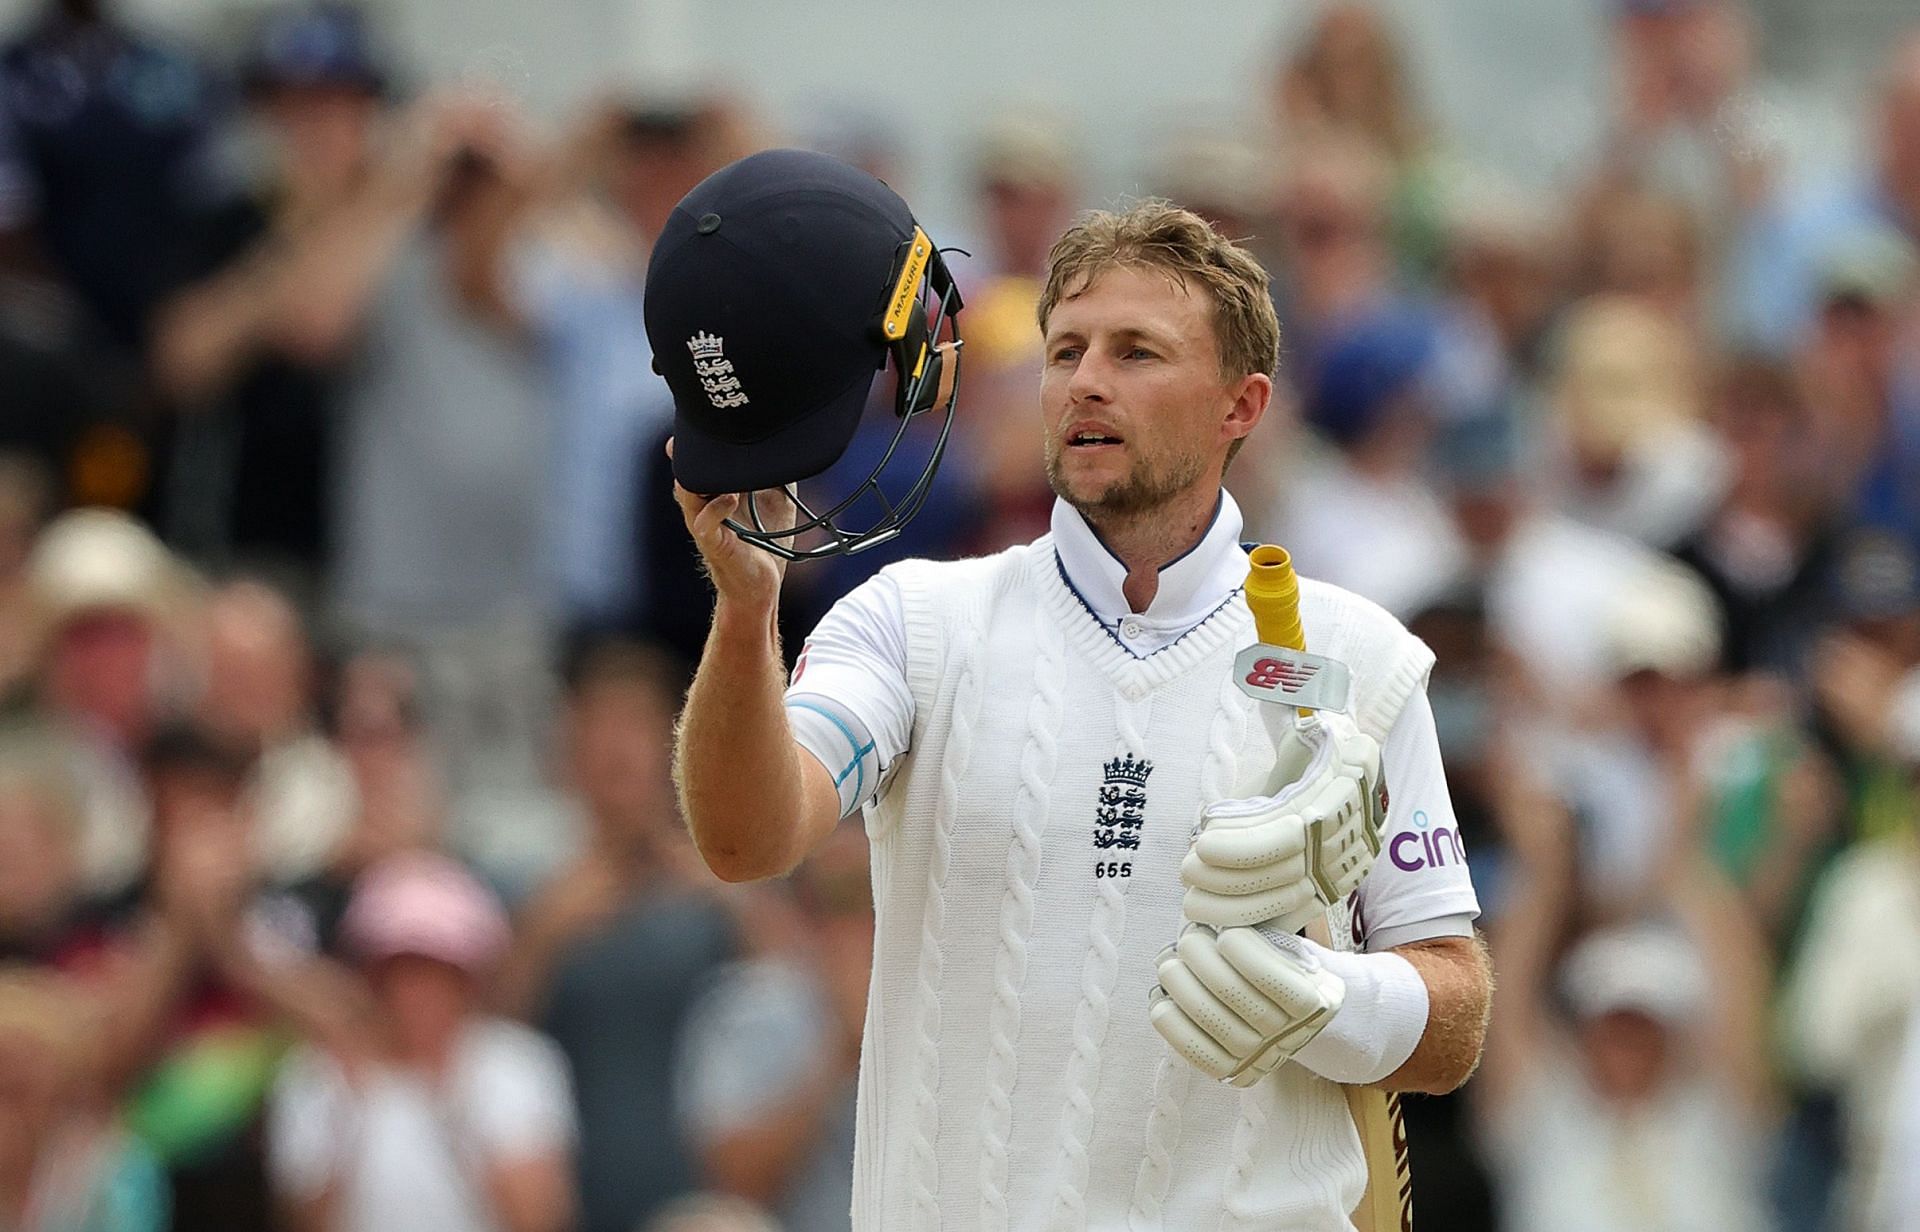 Top 7 England batters with most hundreds in Test cricket ft. Joe Root